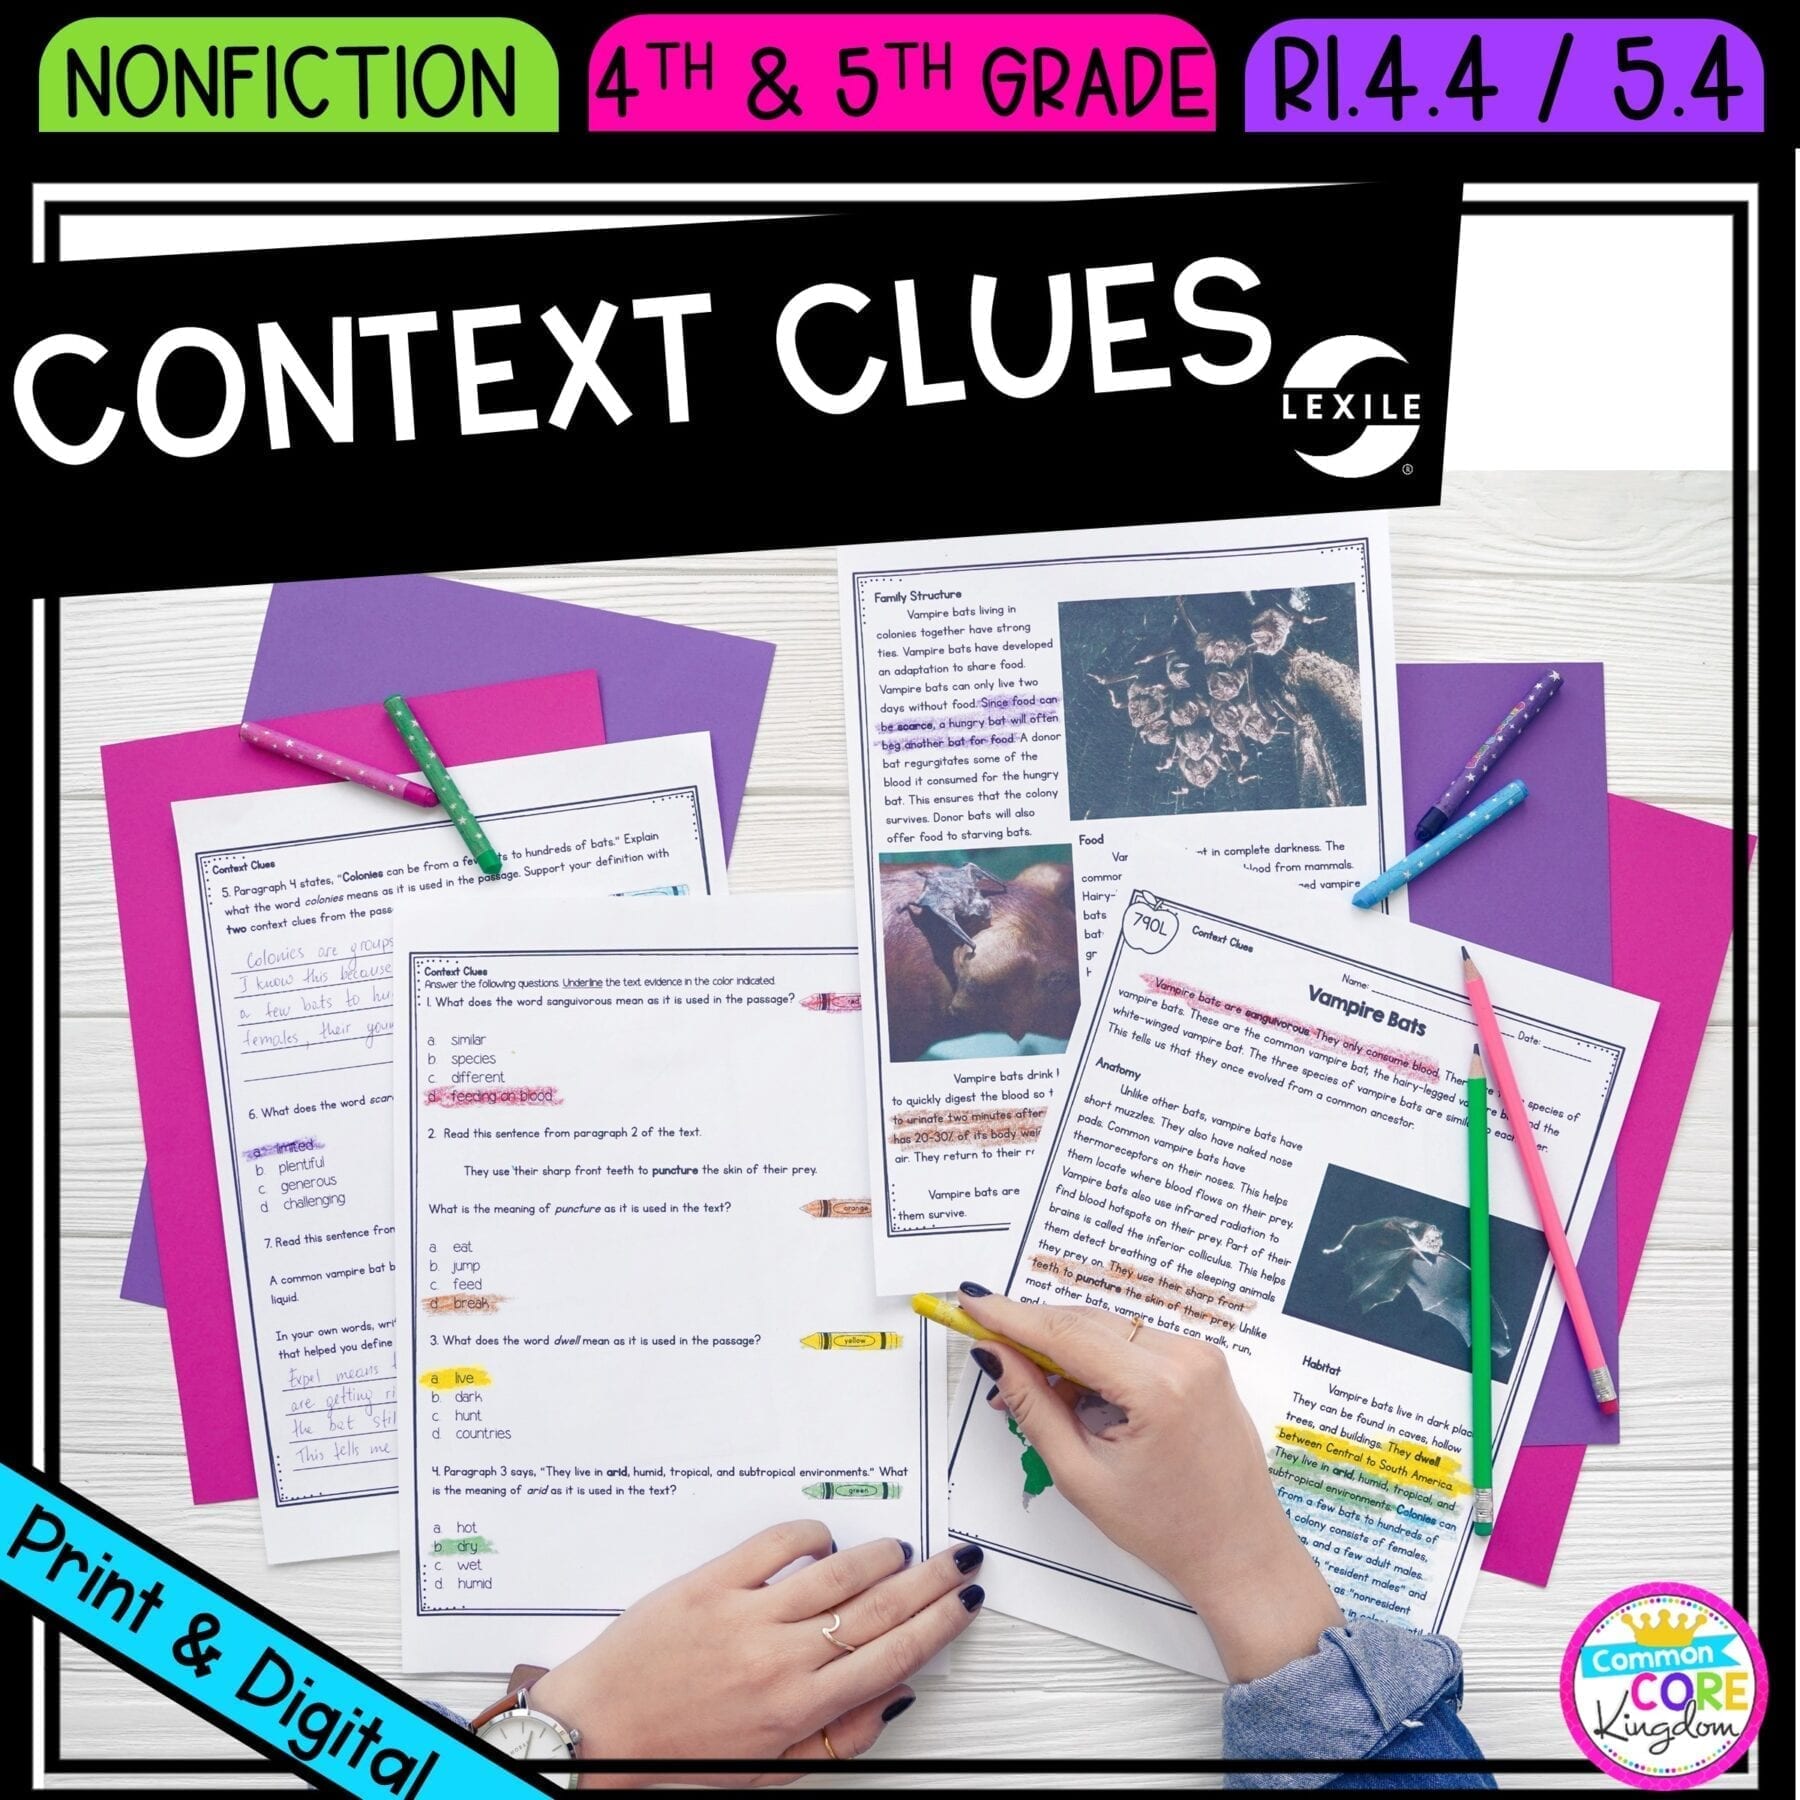 Context Clues in Nonfiction for 4th & 5th grade cover showing printable and digital worksheets